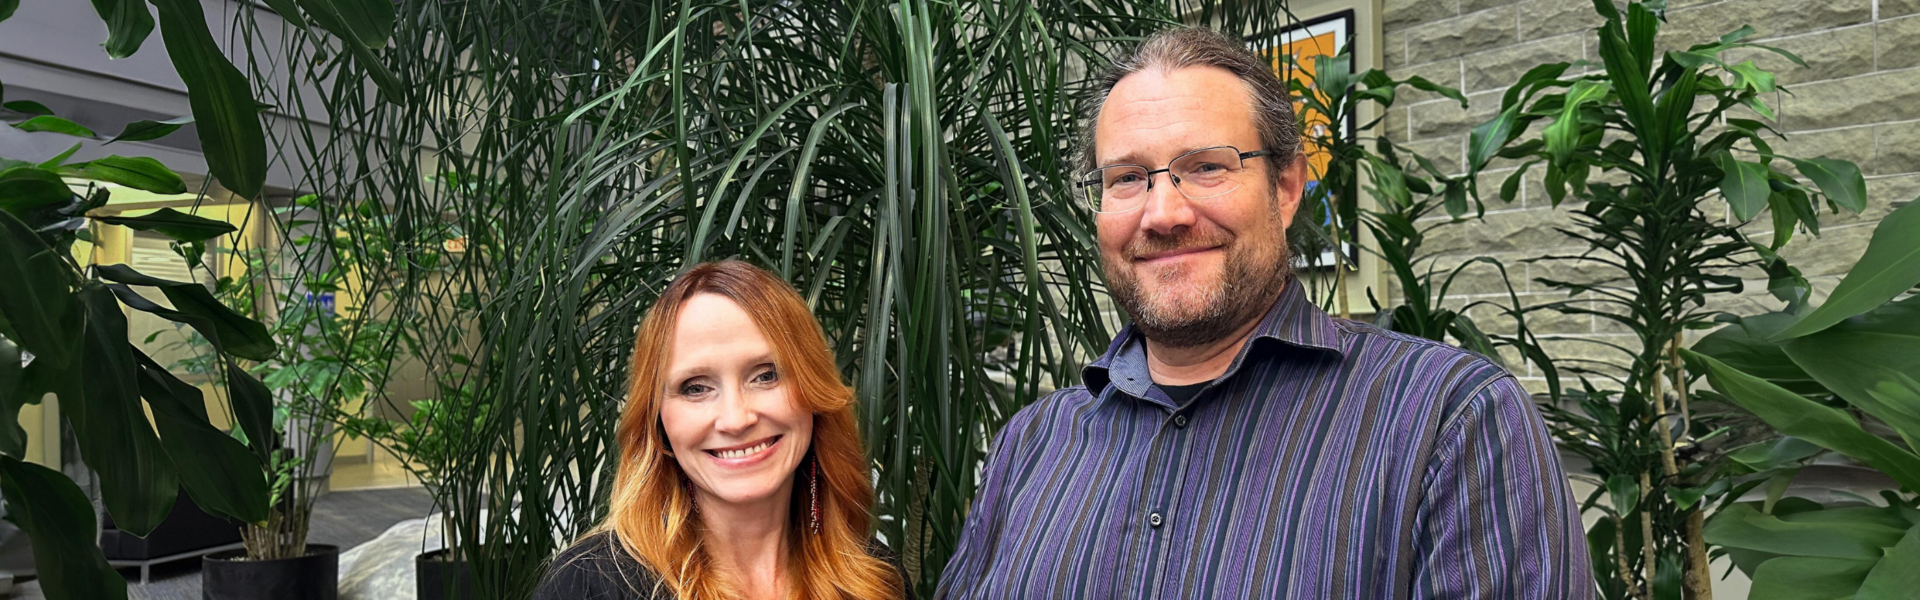 A person wearing black with long red hair stands in front of a lush green plant with a person with a beard in a blue striped shirt wearing glasses.